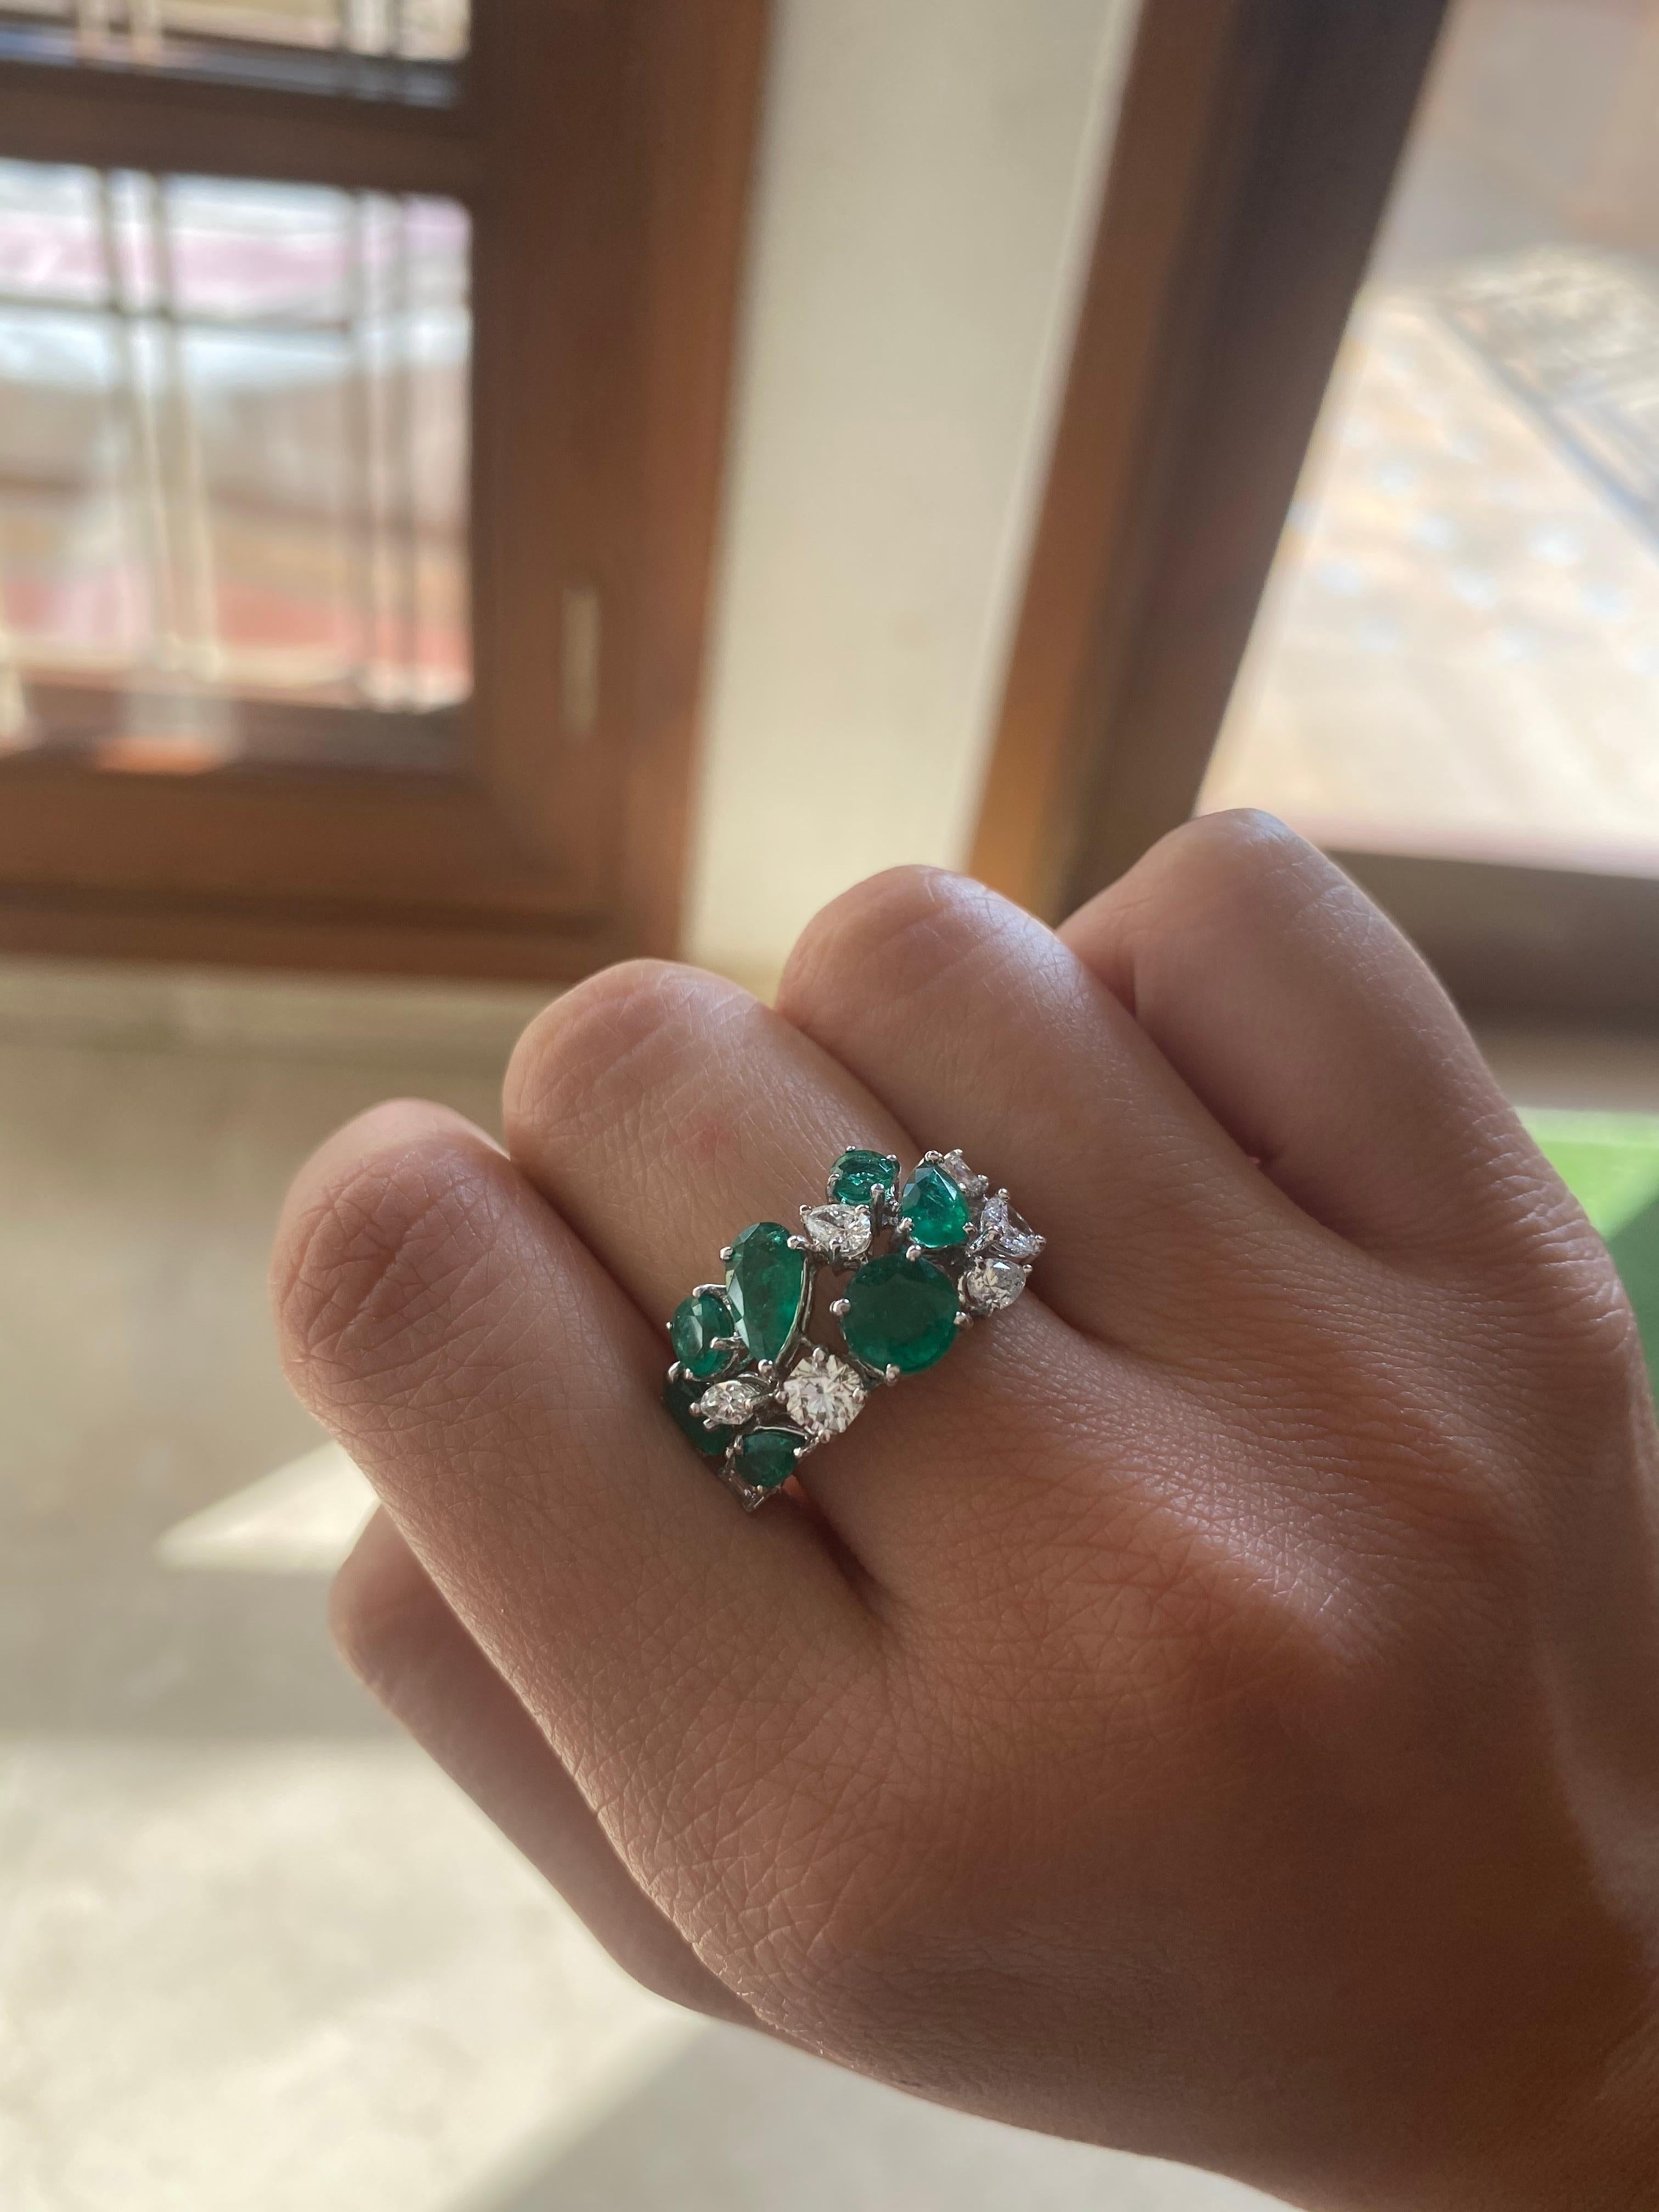 A beautiful and modern band set with Natural emeralds and diamonds in 18k white gold. The natural emarelad of different shapes have a combined weight of 2.96 carats and combined diamond weight is 1.16 carats. The ring dimensions in cm 1.8 x 2.3 x